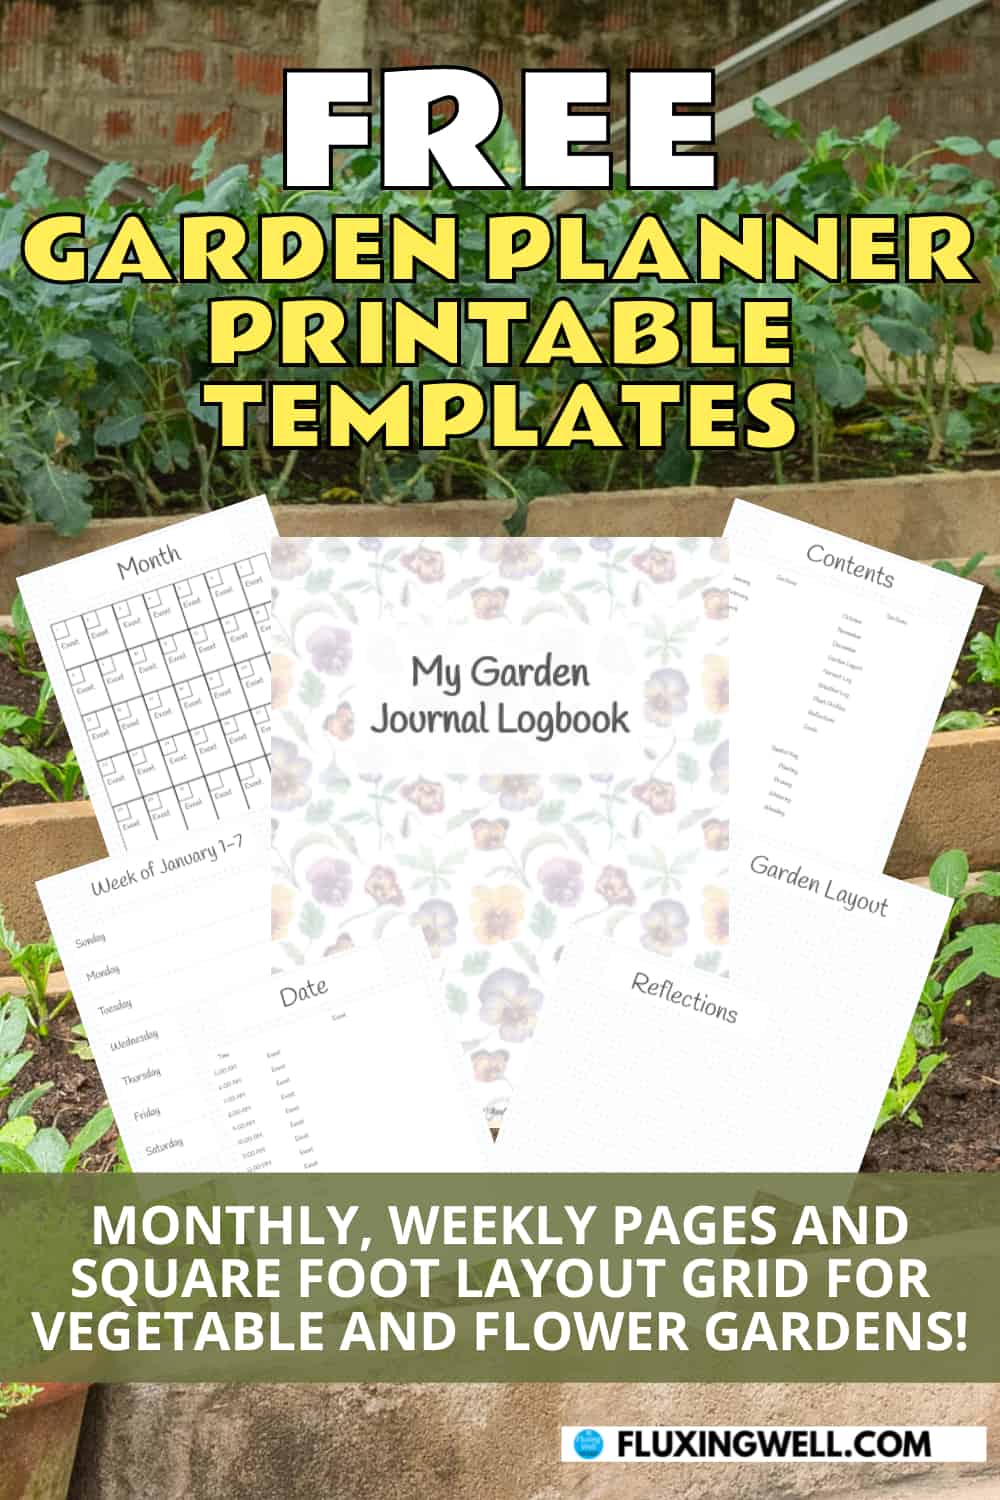 free garden planner printable templates for vegetable and flower gardens journal logbook page collage